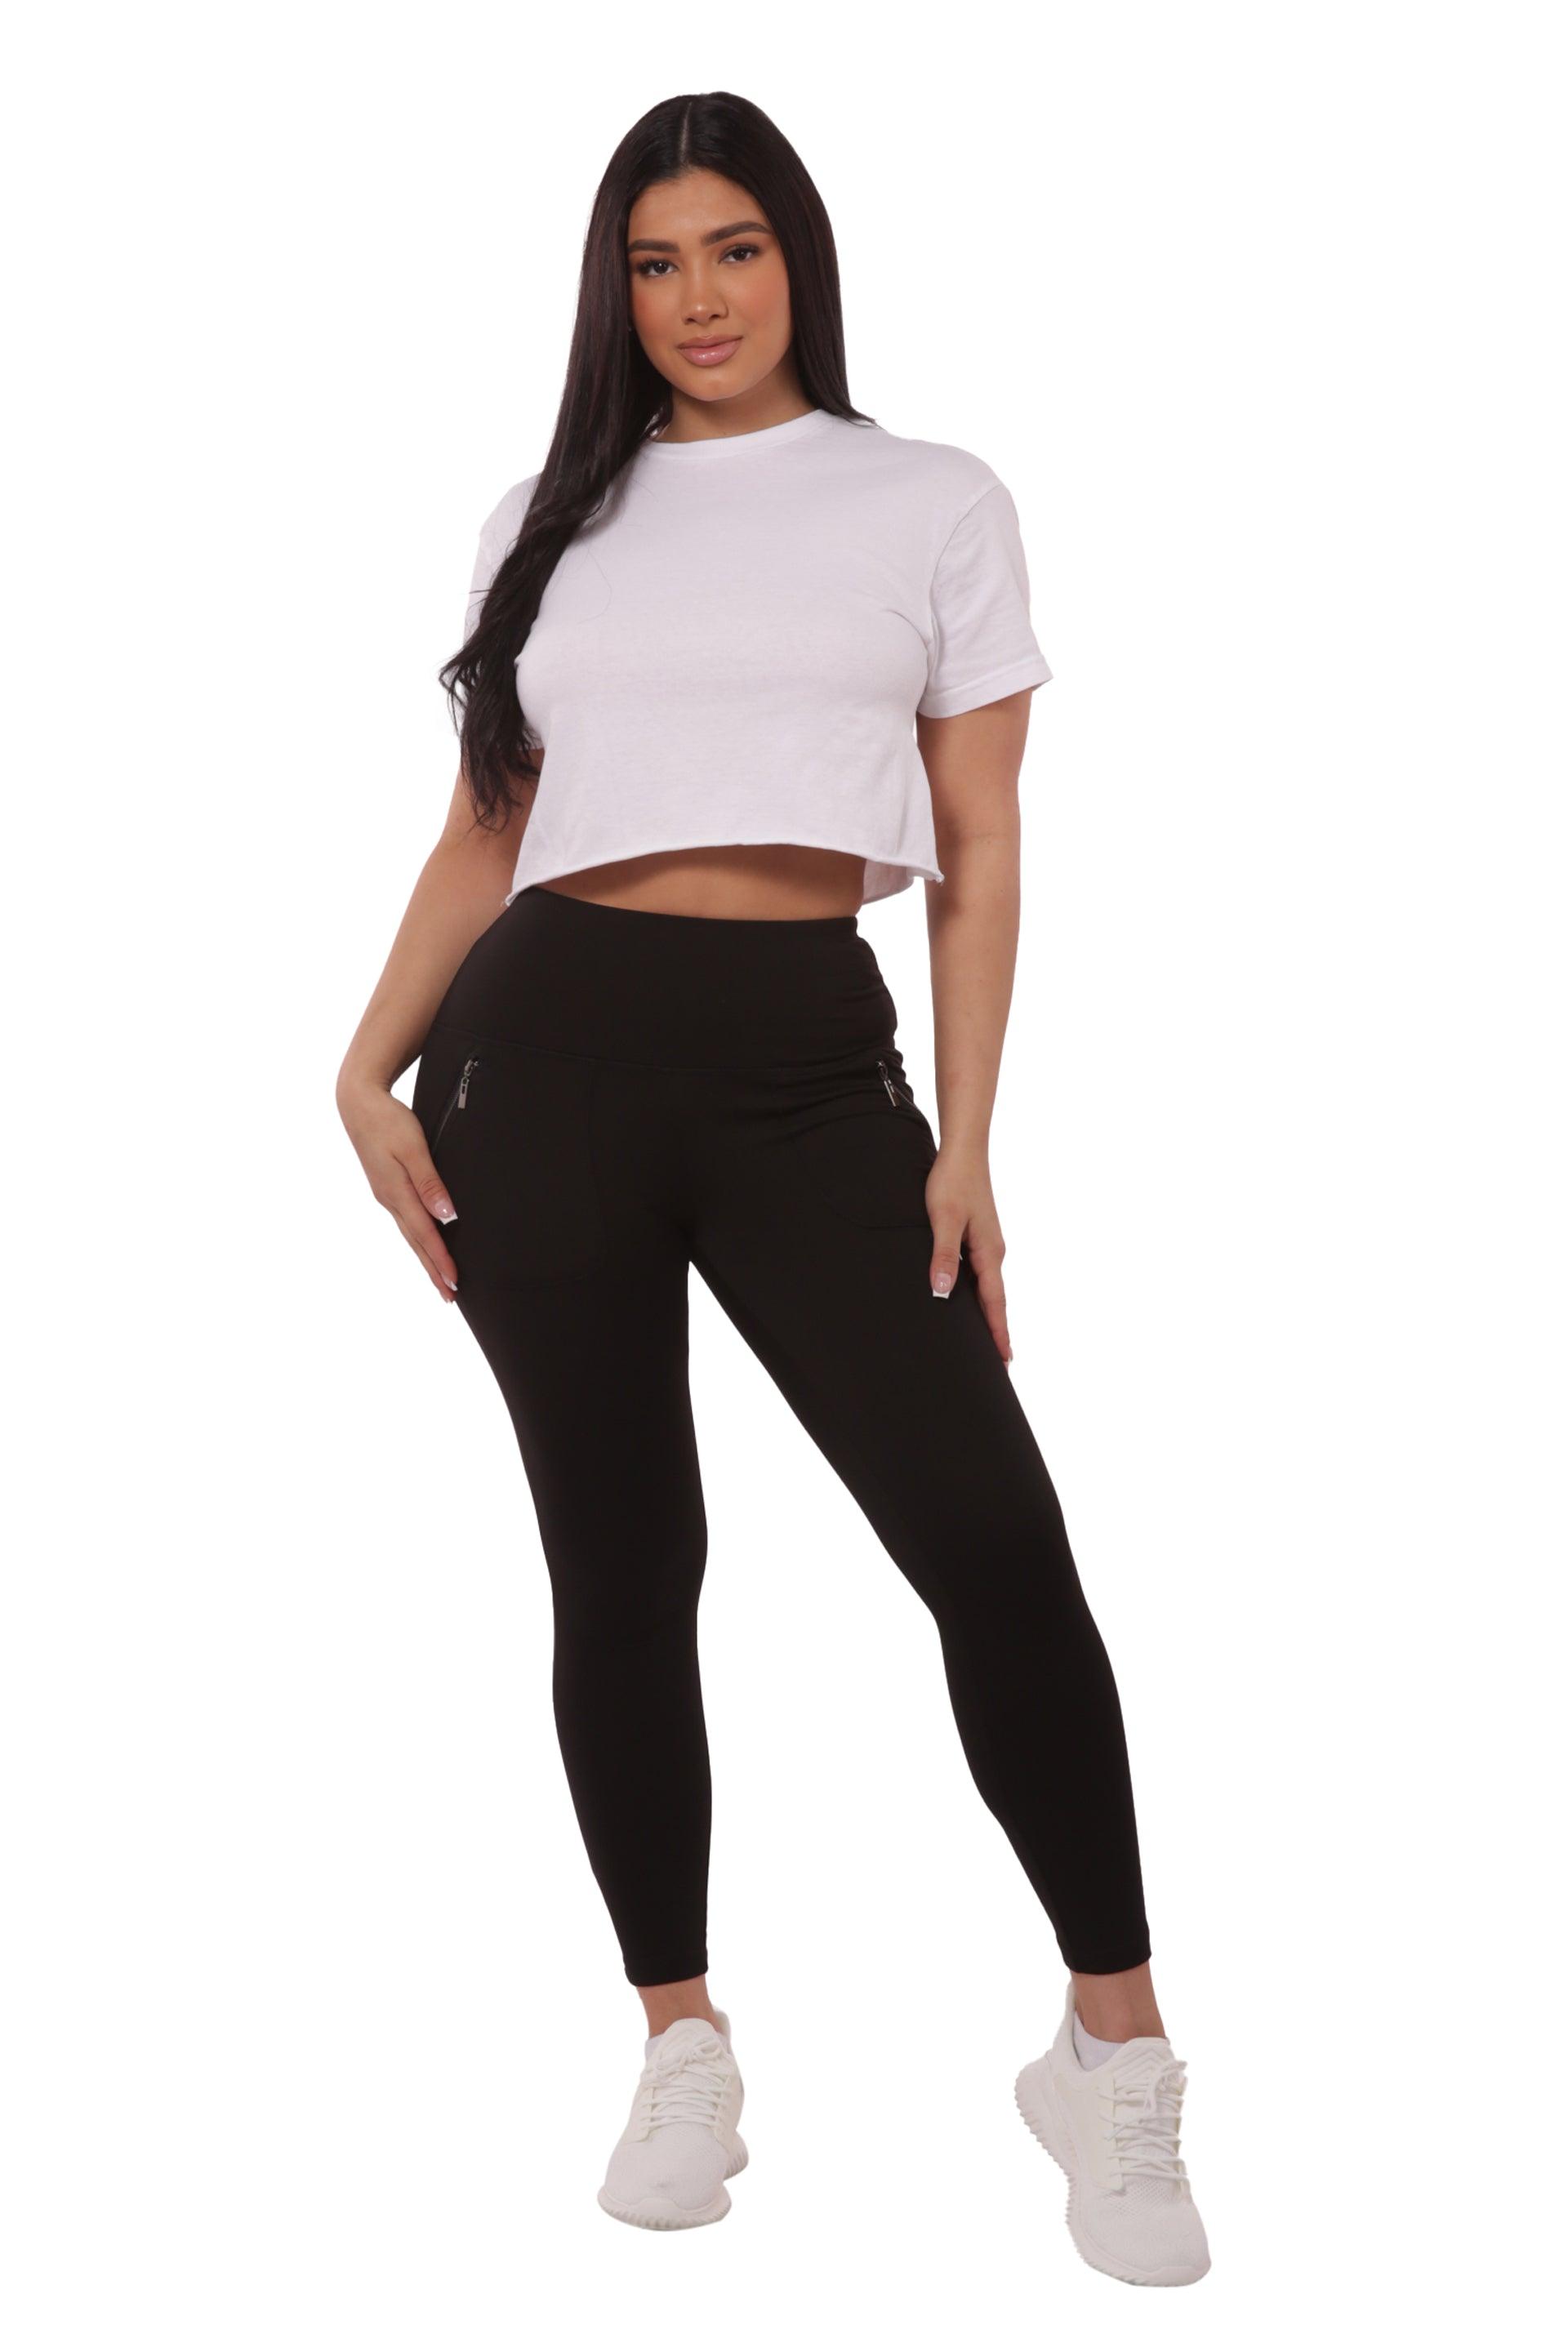 High Rise Buttery Soft Leggings With Zipper Pockets - Black